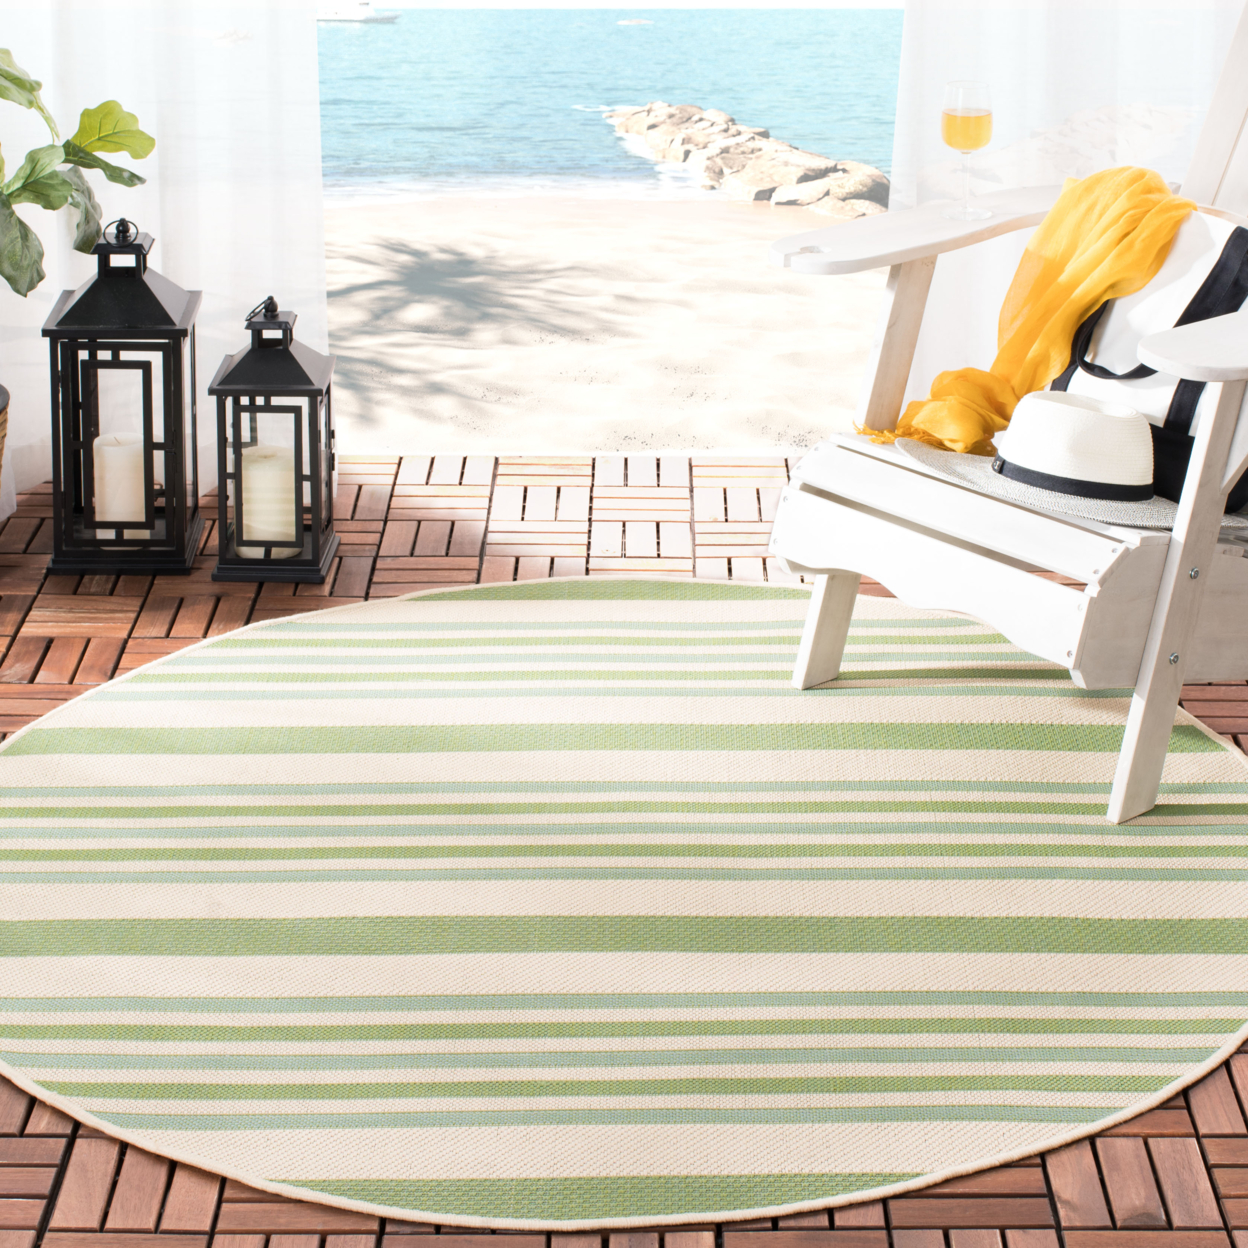 SAFAVIEH Outdoor CY7062-234A18 Courtyard Beige / Green Rug - 6' 7 Square